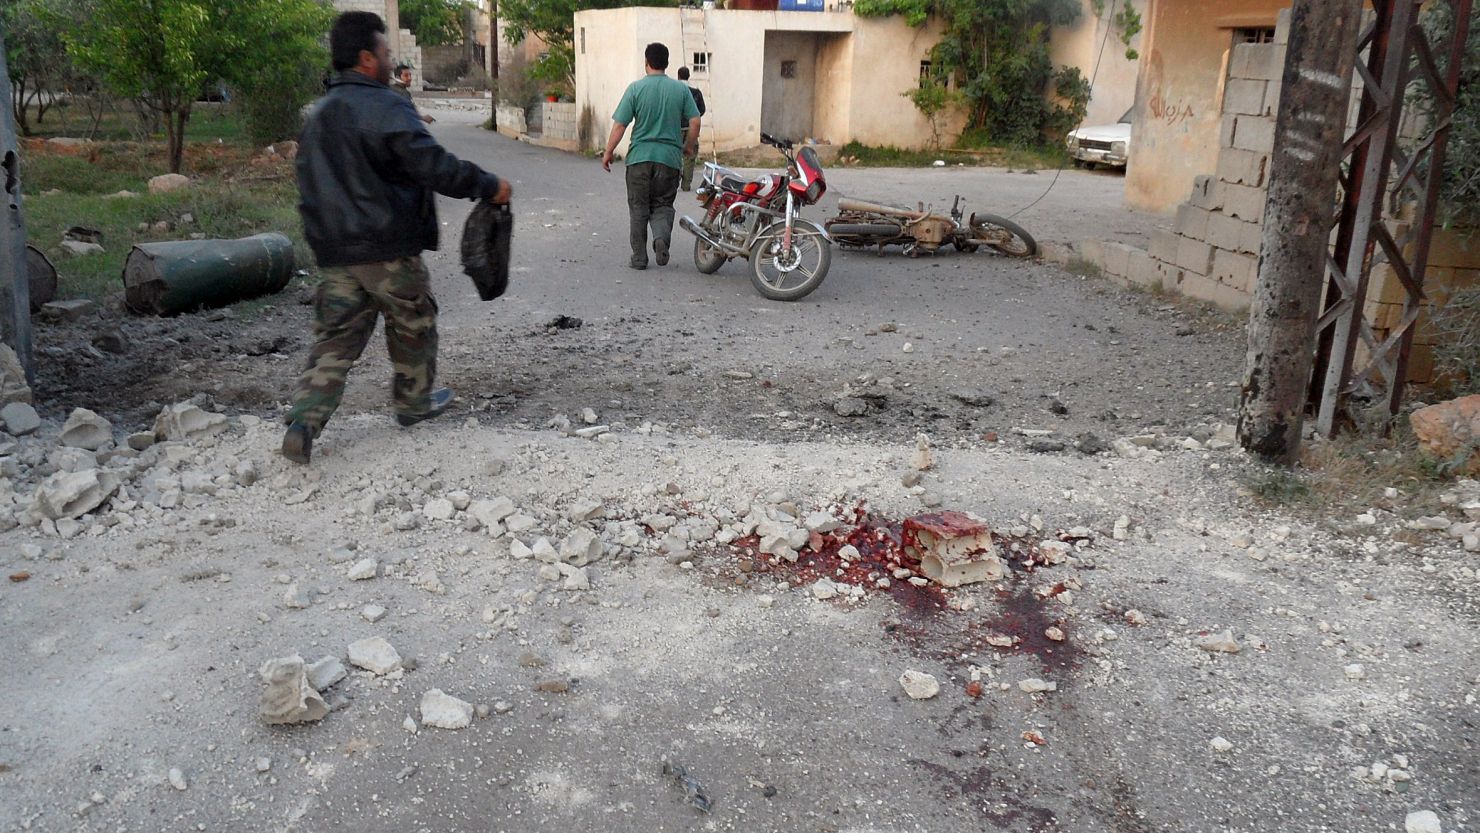 A man walks past bloodstains on a street in the Lebanese border town of Qasr on Sunday, after the shelling.